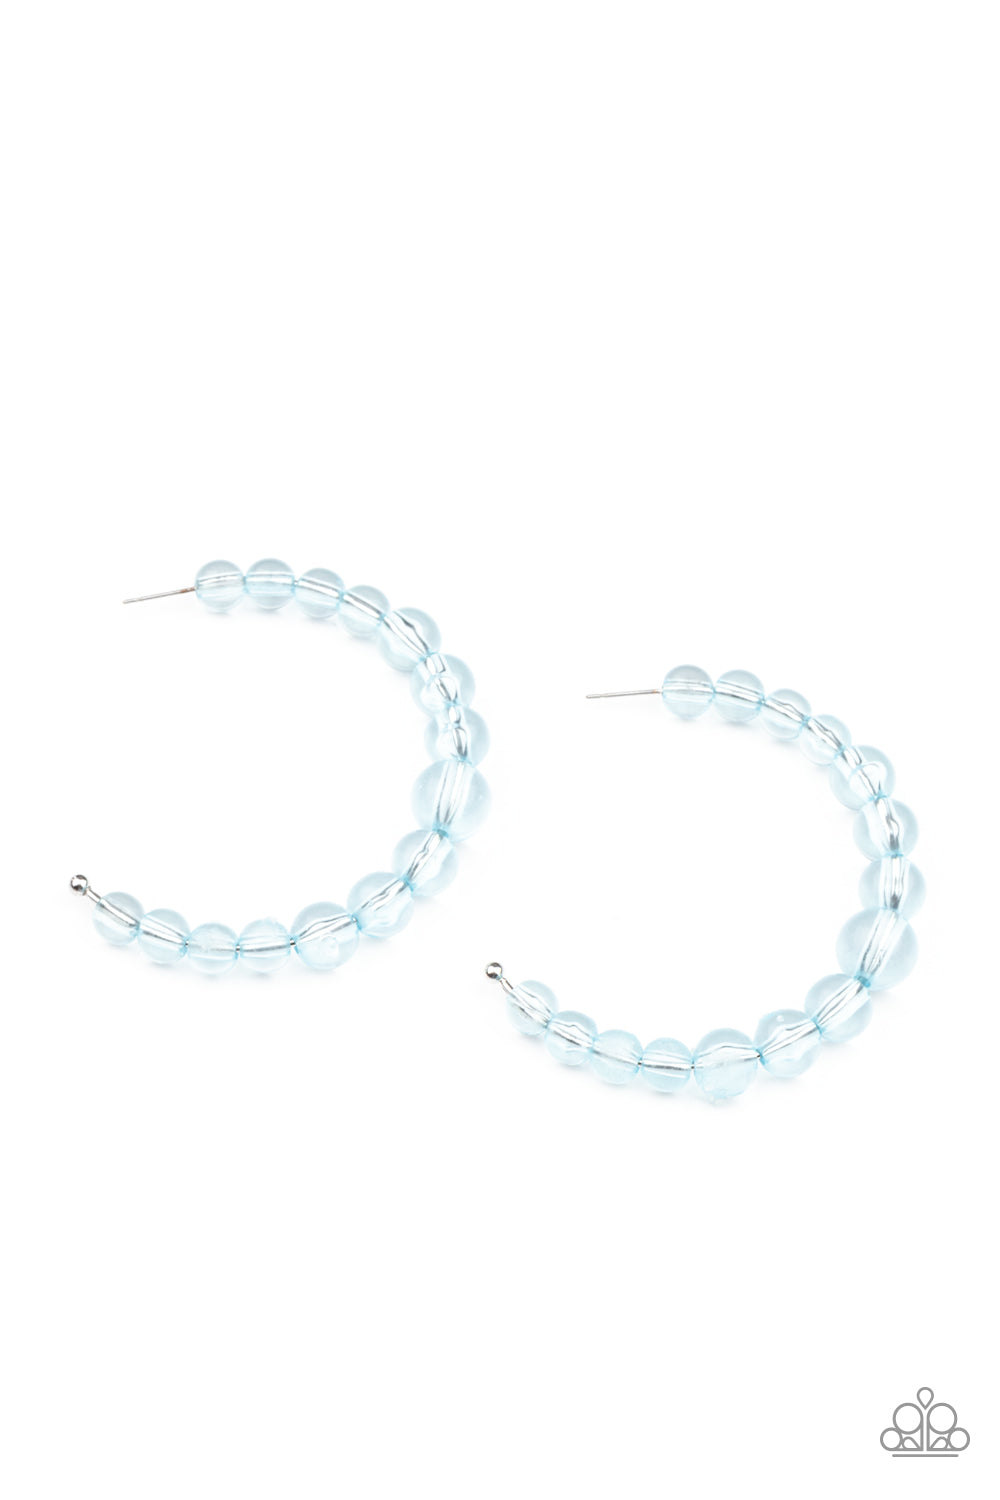 In The Clear Blue Hoop Earring - Paparazzi Accessories  Gradually increasing in size at the center, a glassy collection of Cerulean beads are threaded along an oversized hoop for a bubbly effect. Earring attaches to a standard post fitting. Hoop measures approximately 2 1/2" in diameter.  All Paparazzi Accessories are lead free and nickel free!  Sold as one pair of hoop earrings.